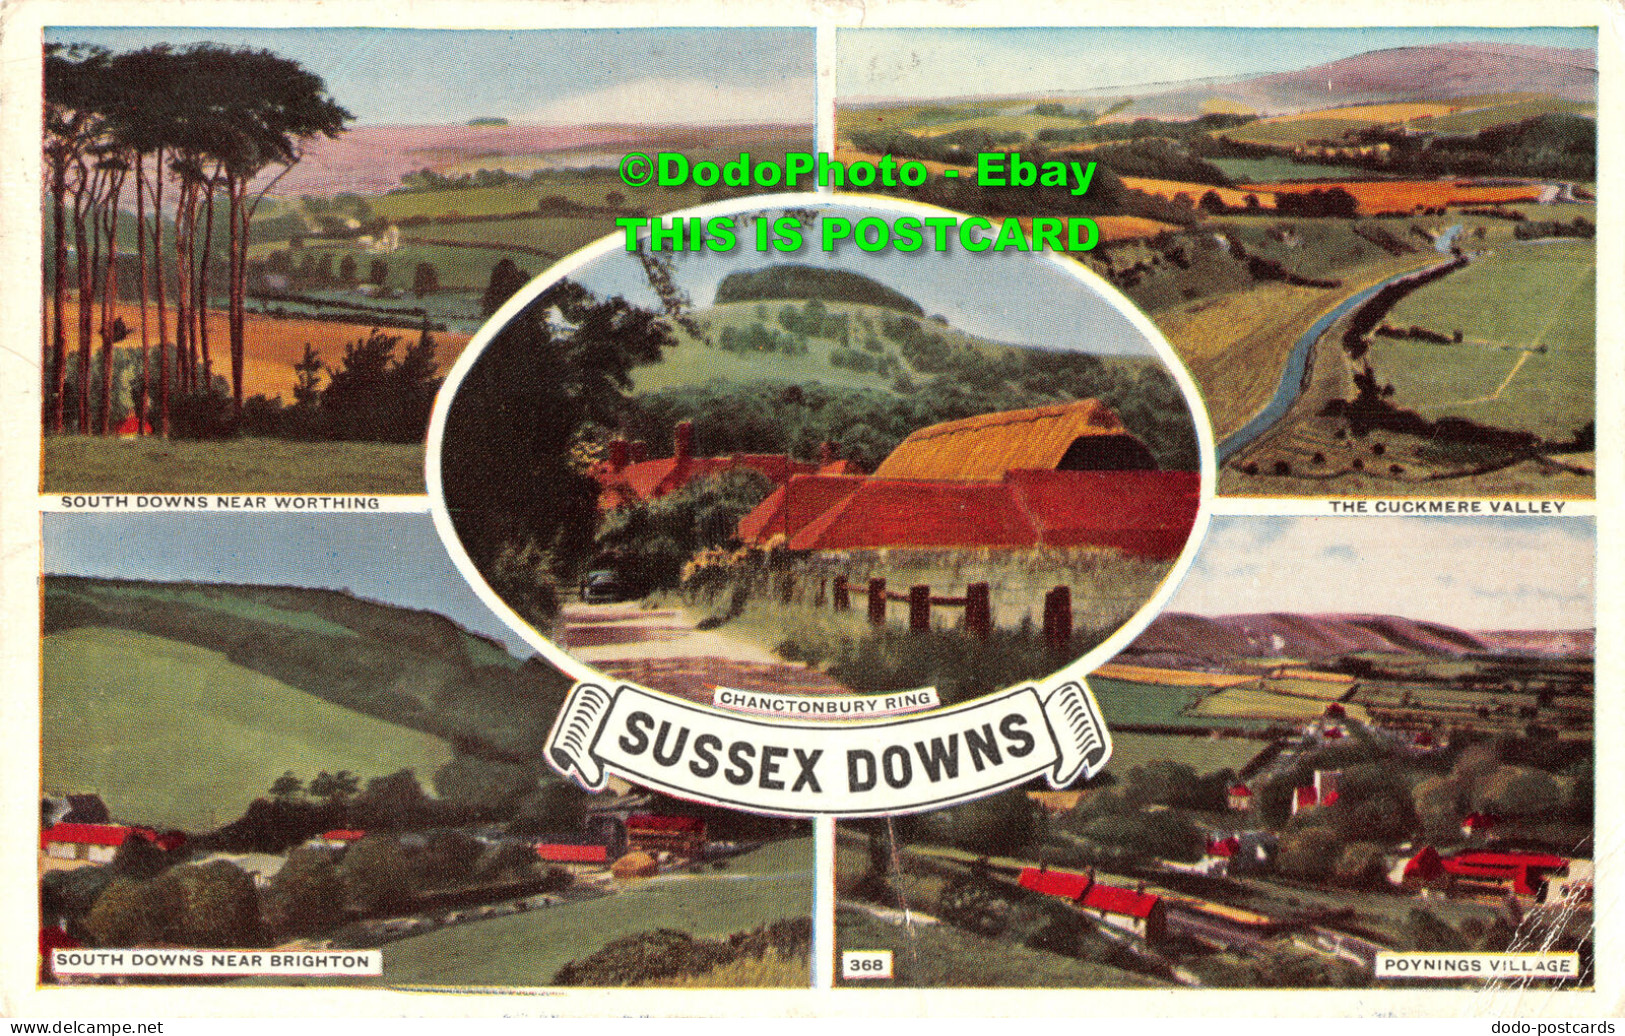 R453615 Sussex Downs. 368. Post Card. 1958 - World